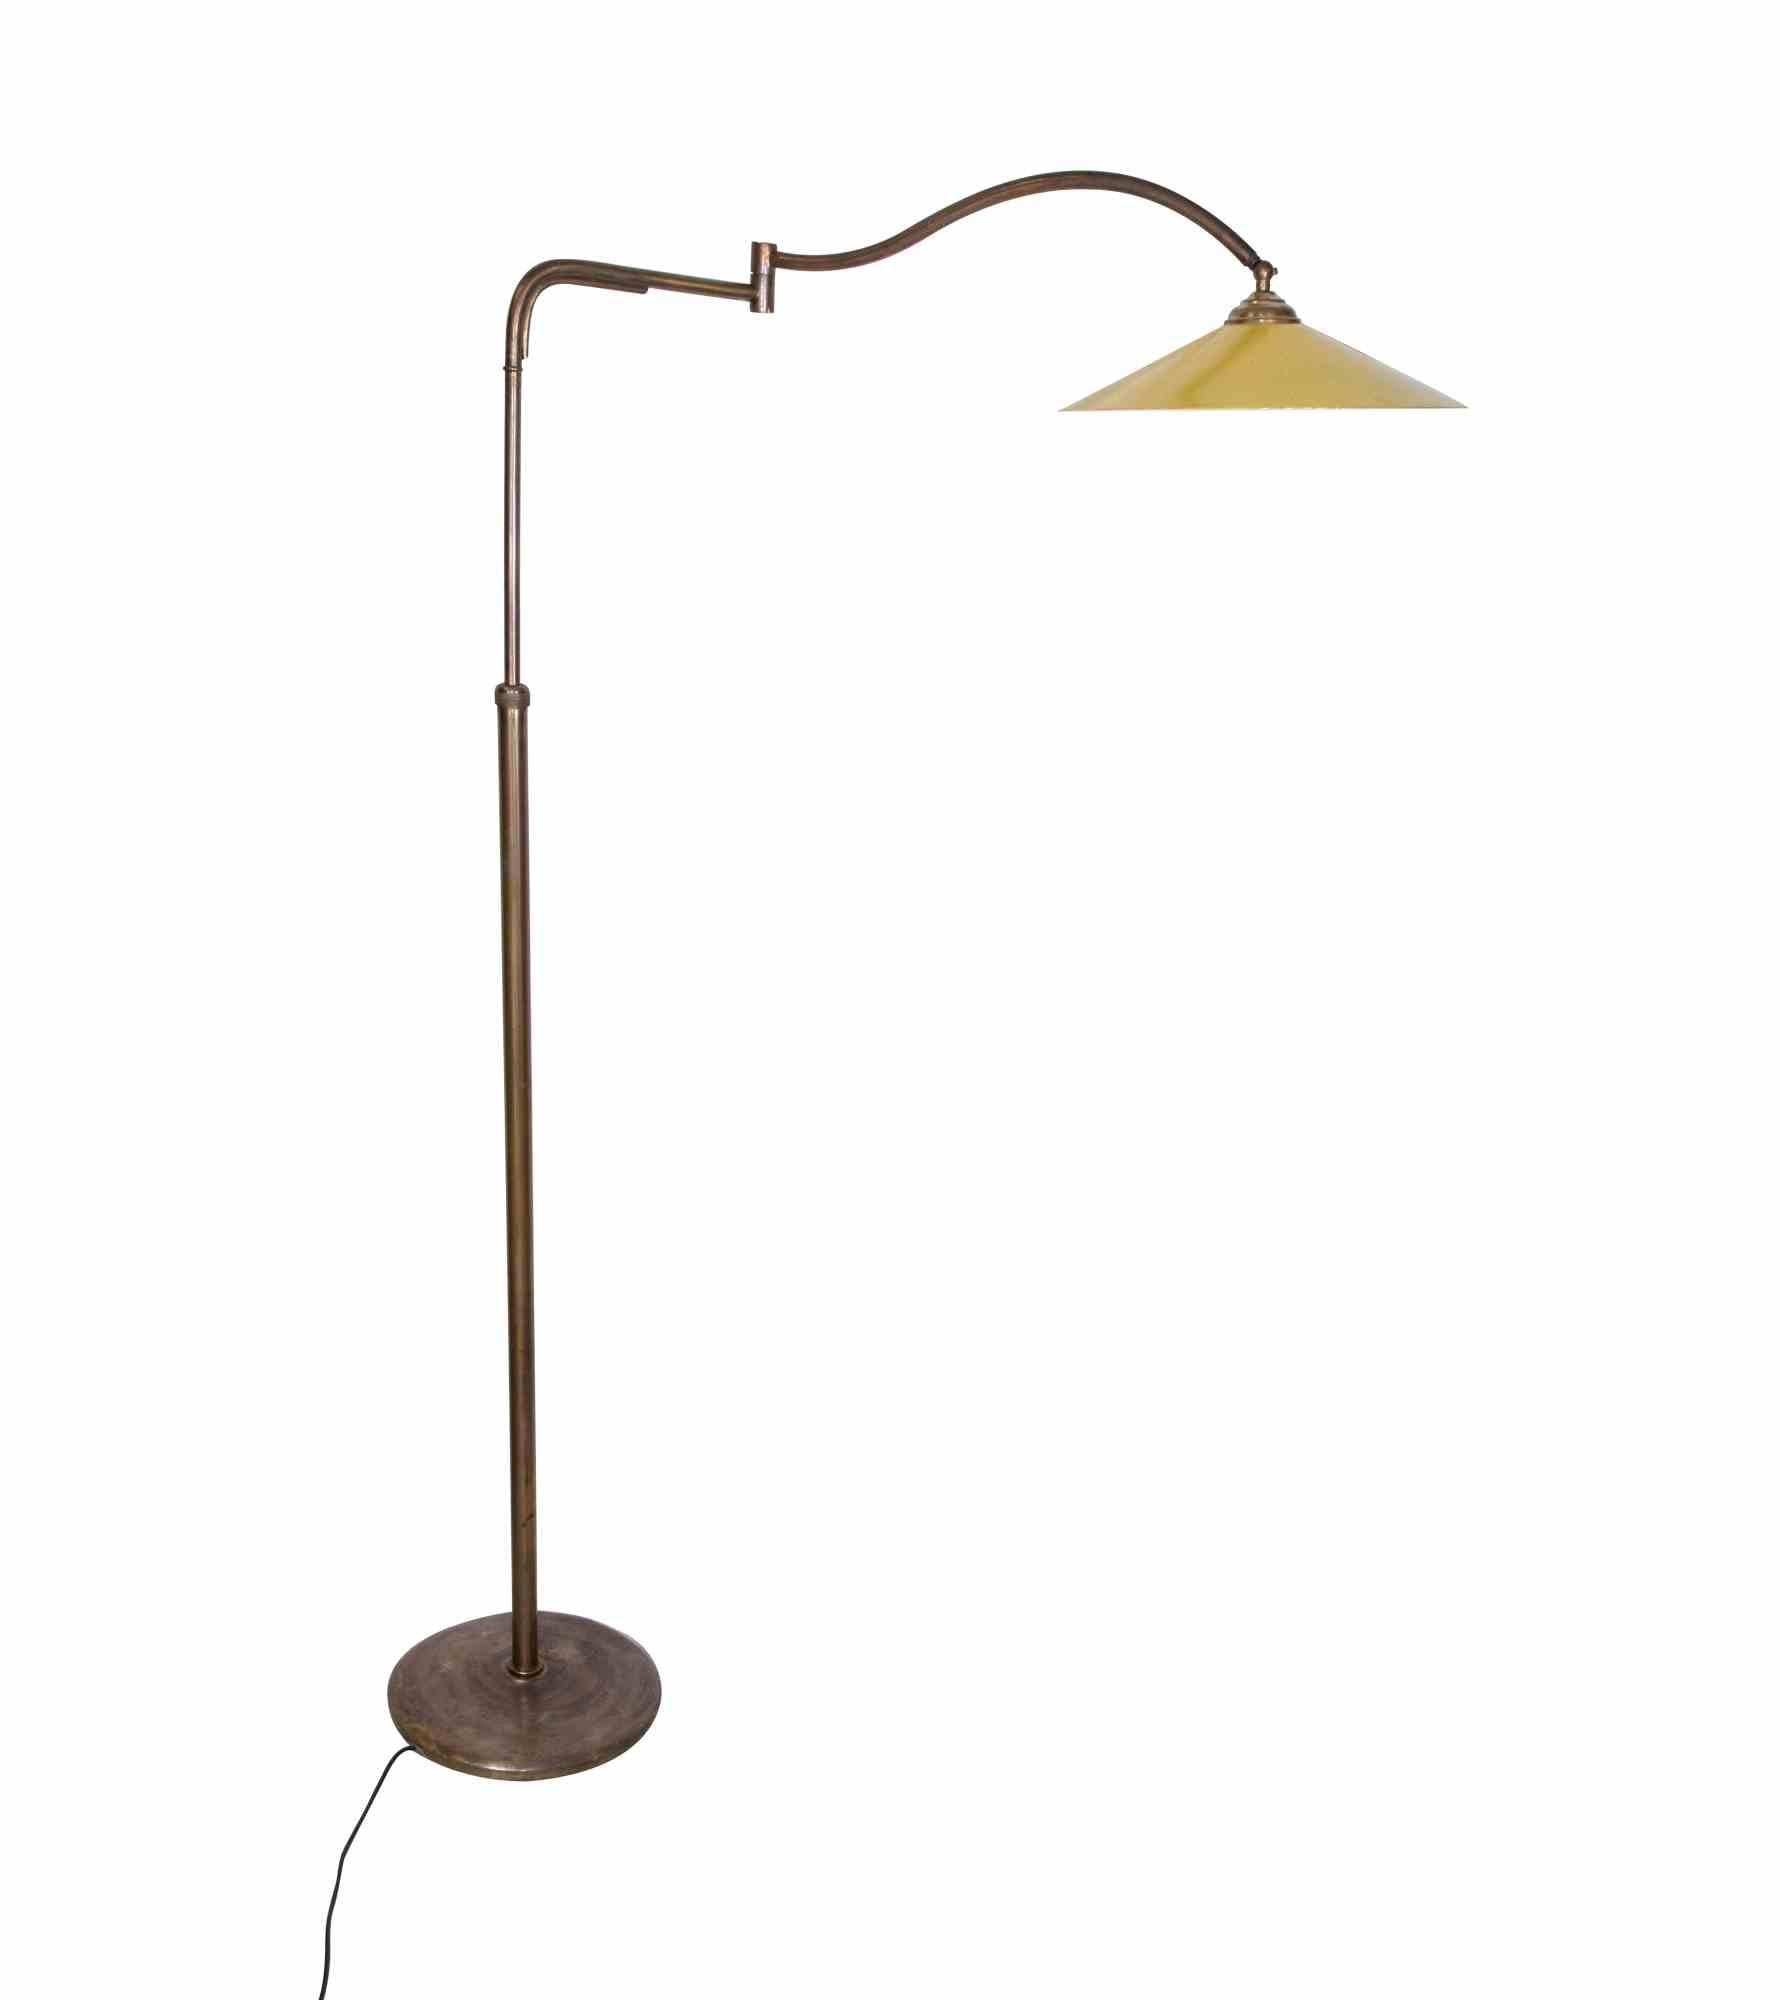 Mid-20th Century Vintage Floor Lamp by Angelo Lelli for Arredoluce Italy, circa 1950s